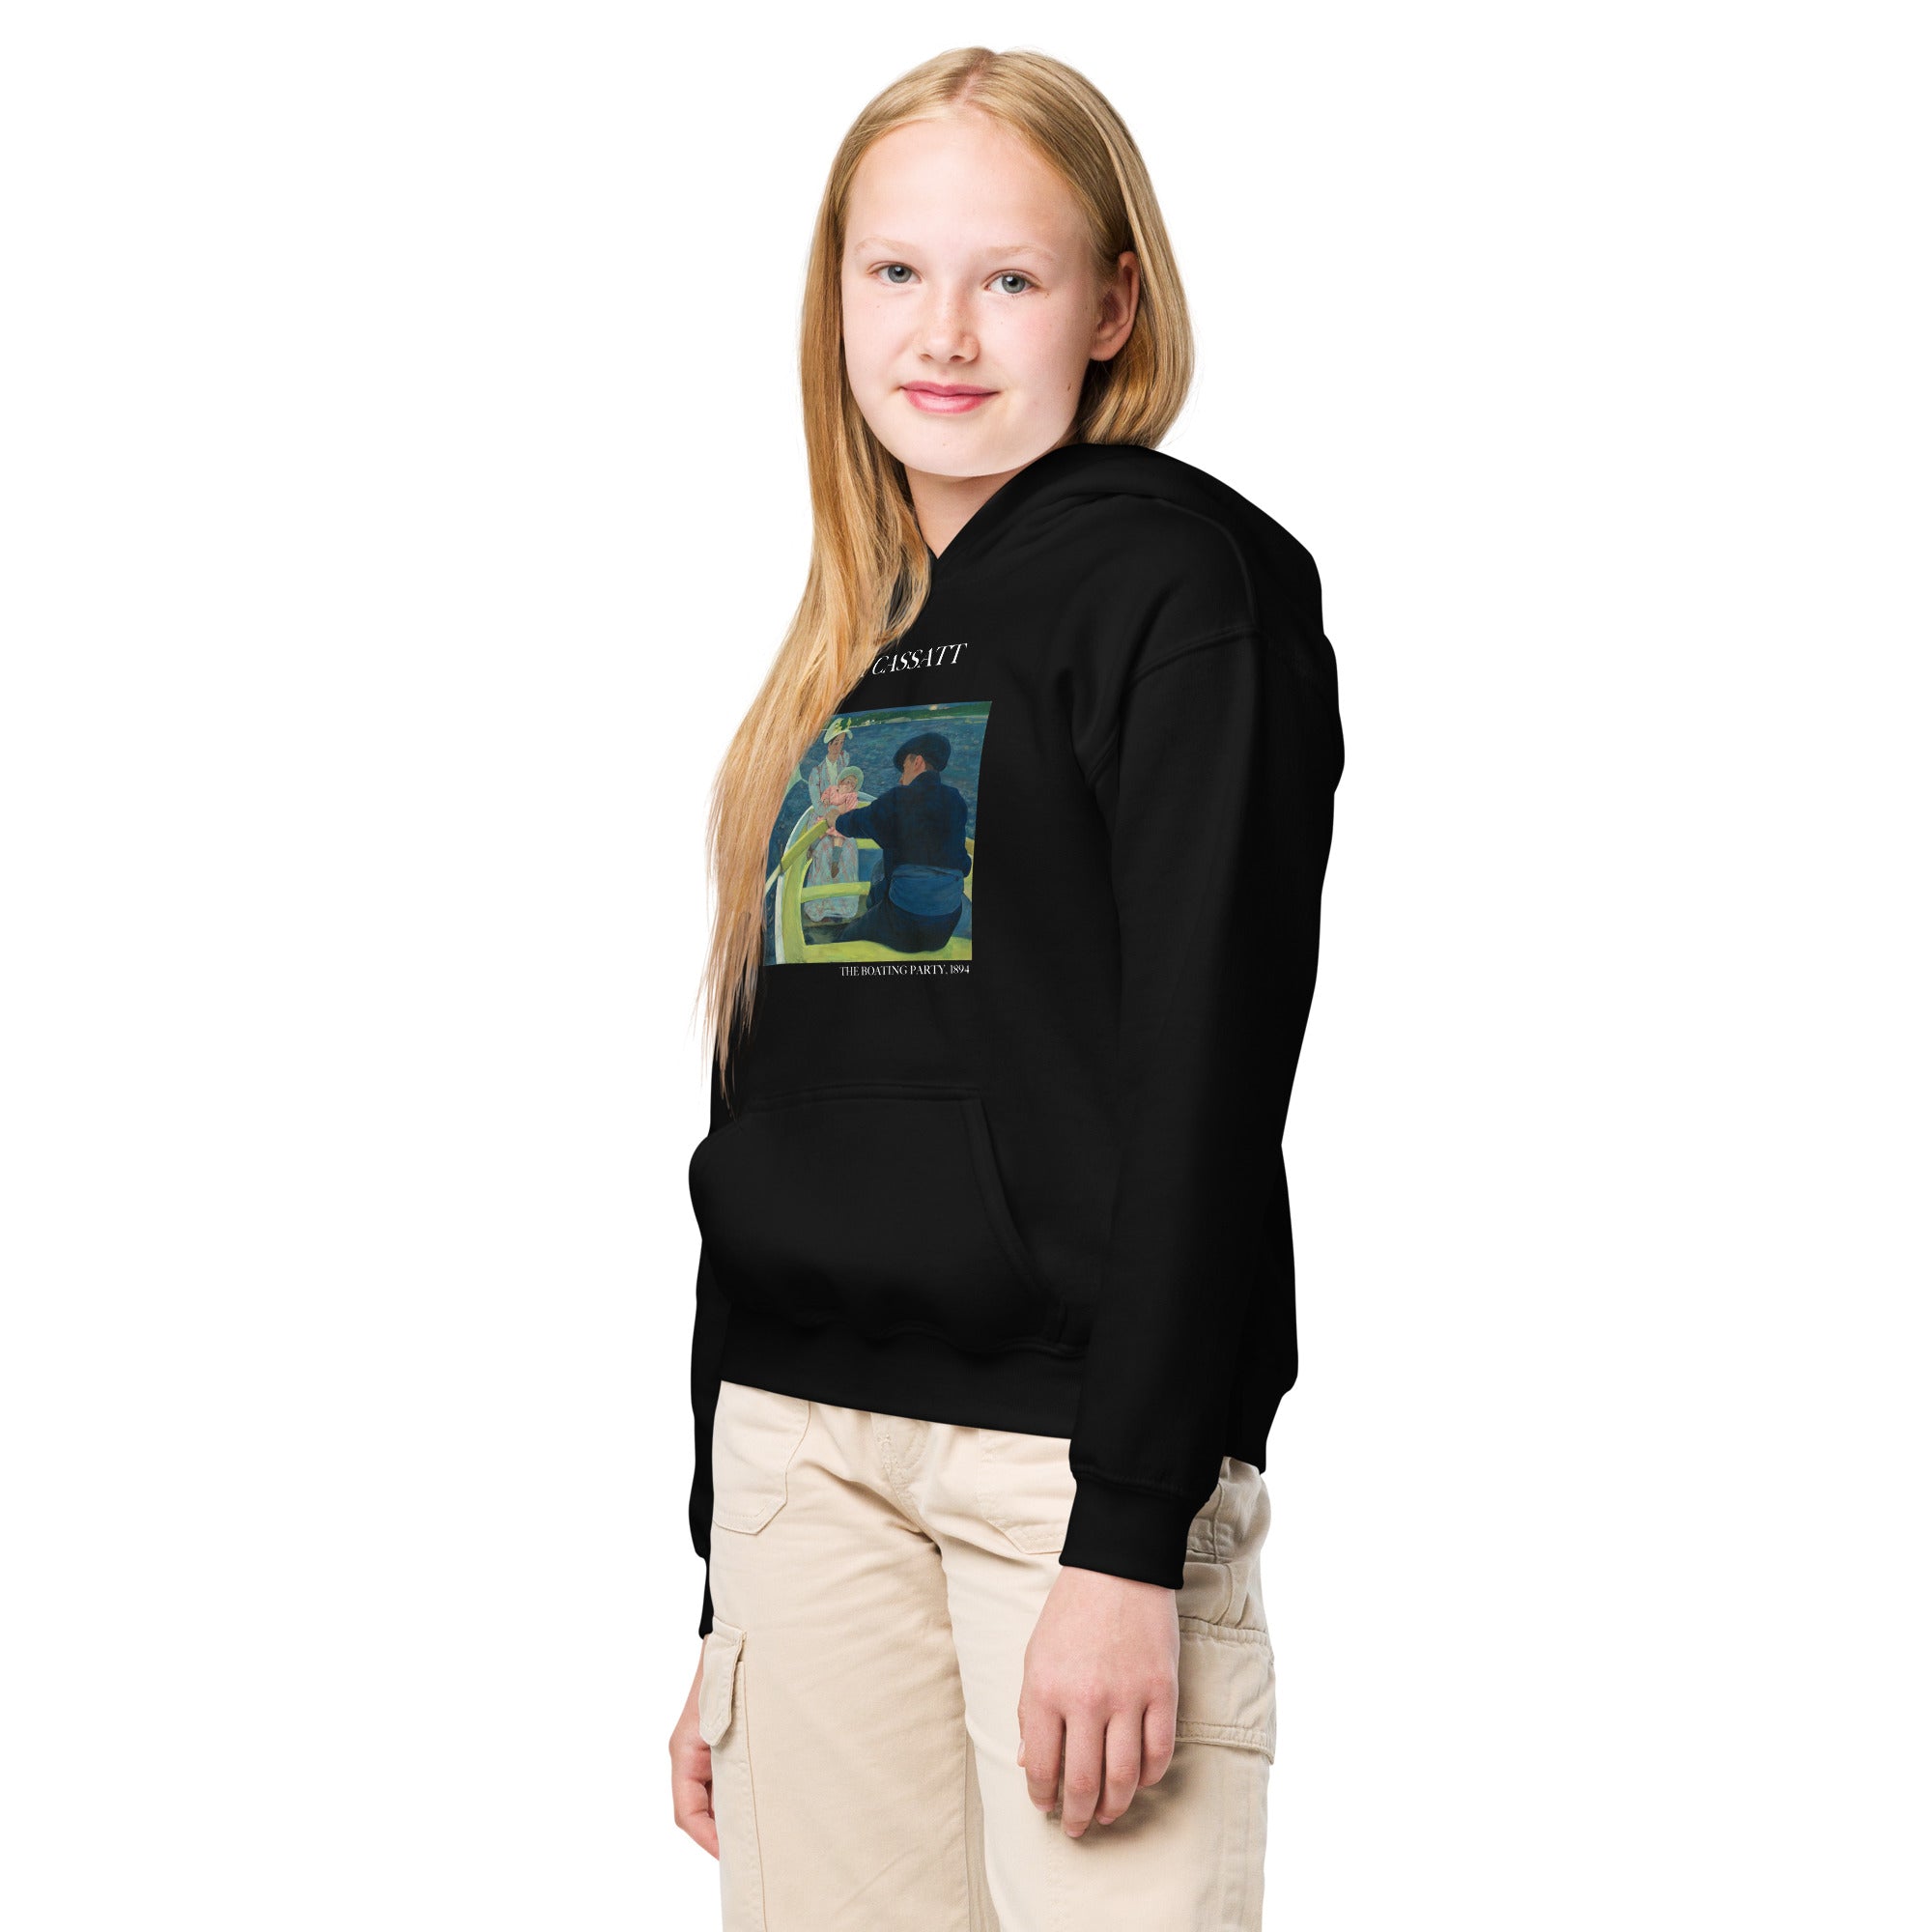 Mary Cassatt 'The Boating Party' Famous Painting Hoodie | Premium Youth Art Hoodie